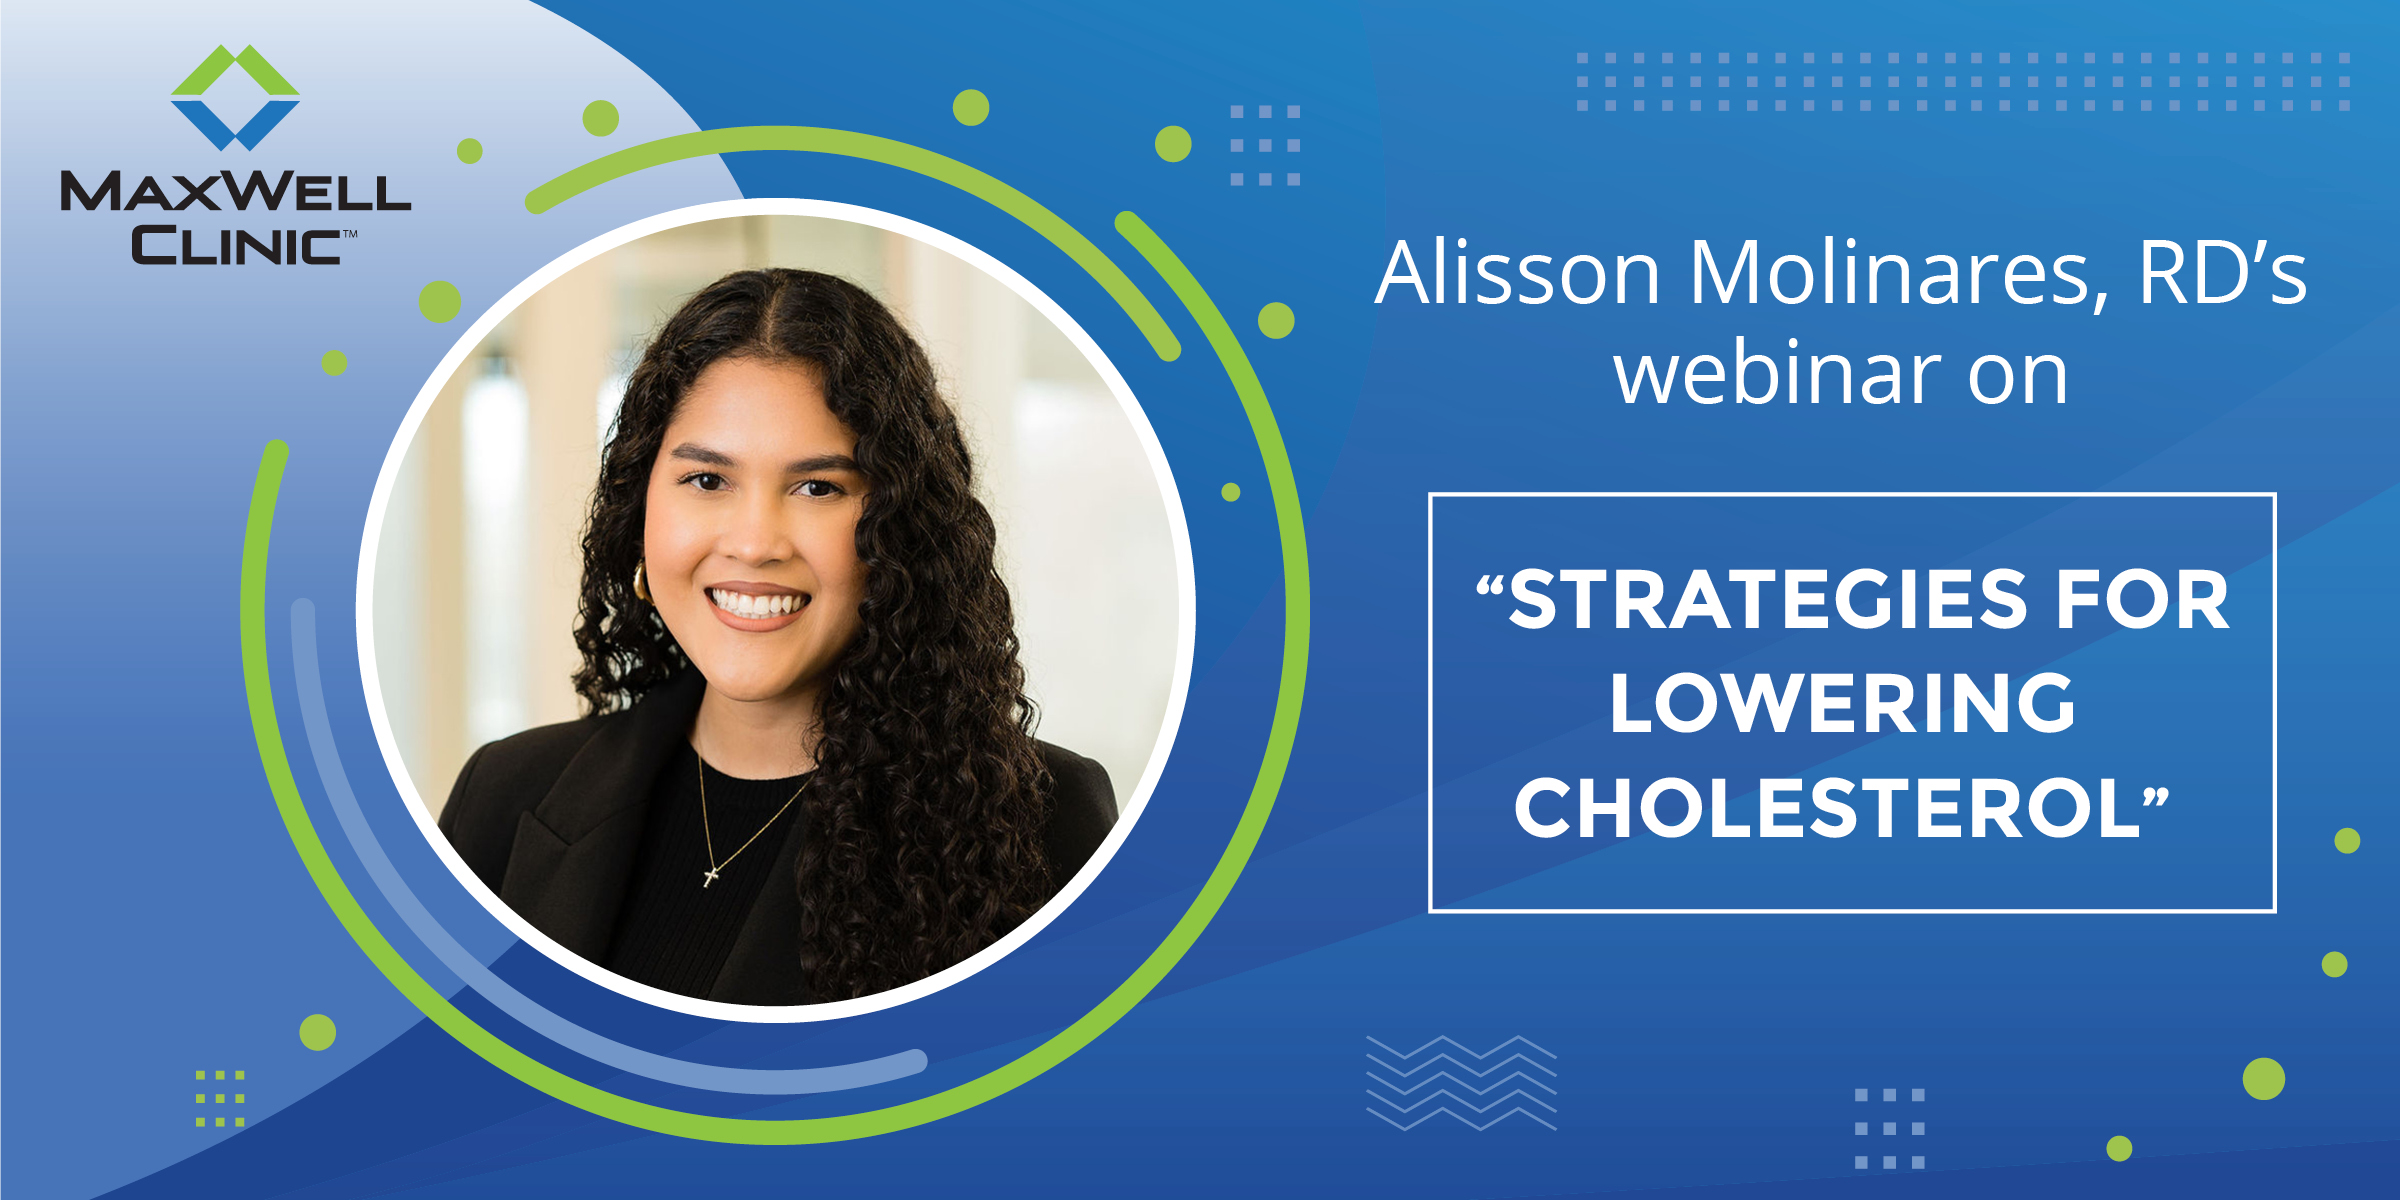 Strategies for Lowering Cholesterol with Alisson Molinares, RD